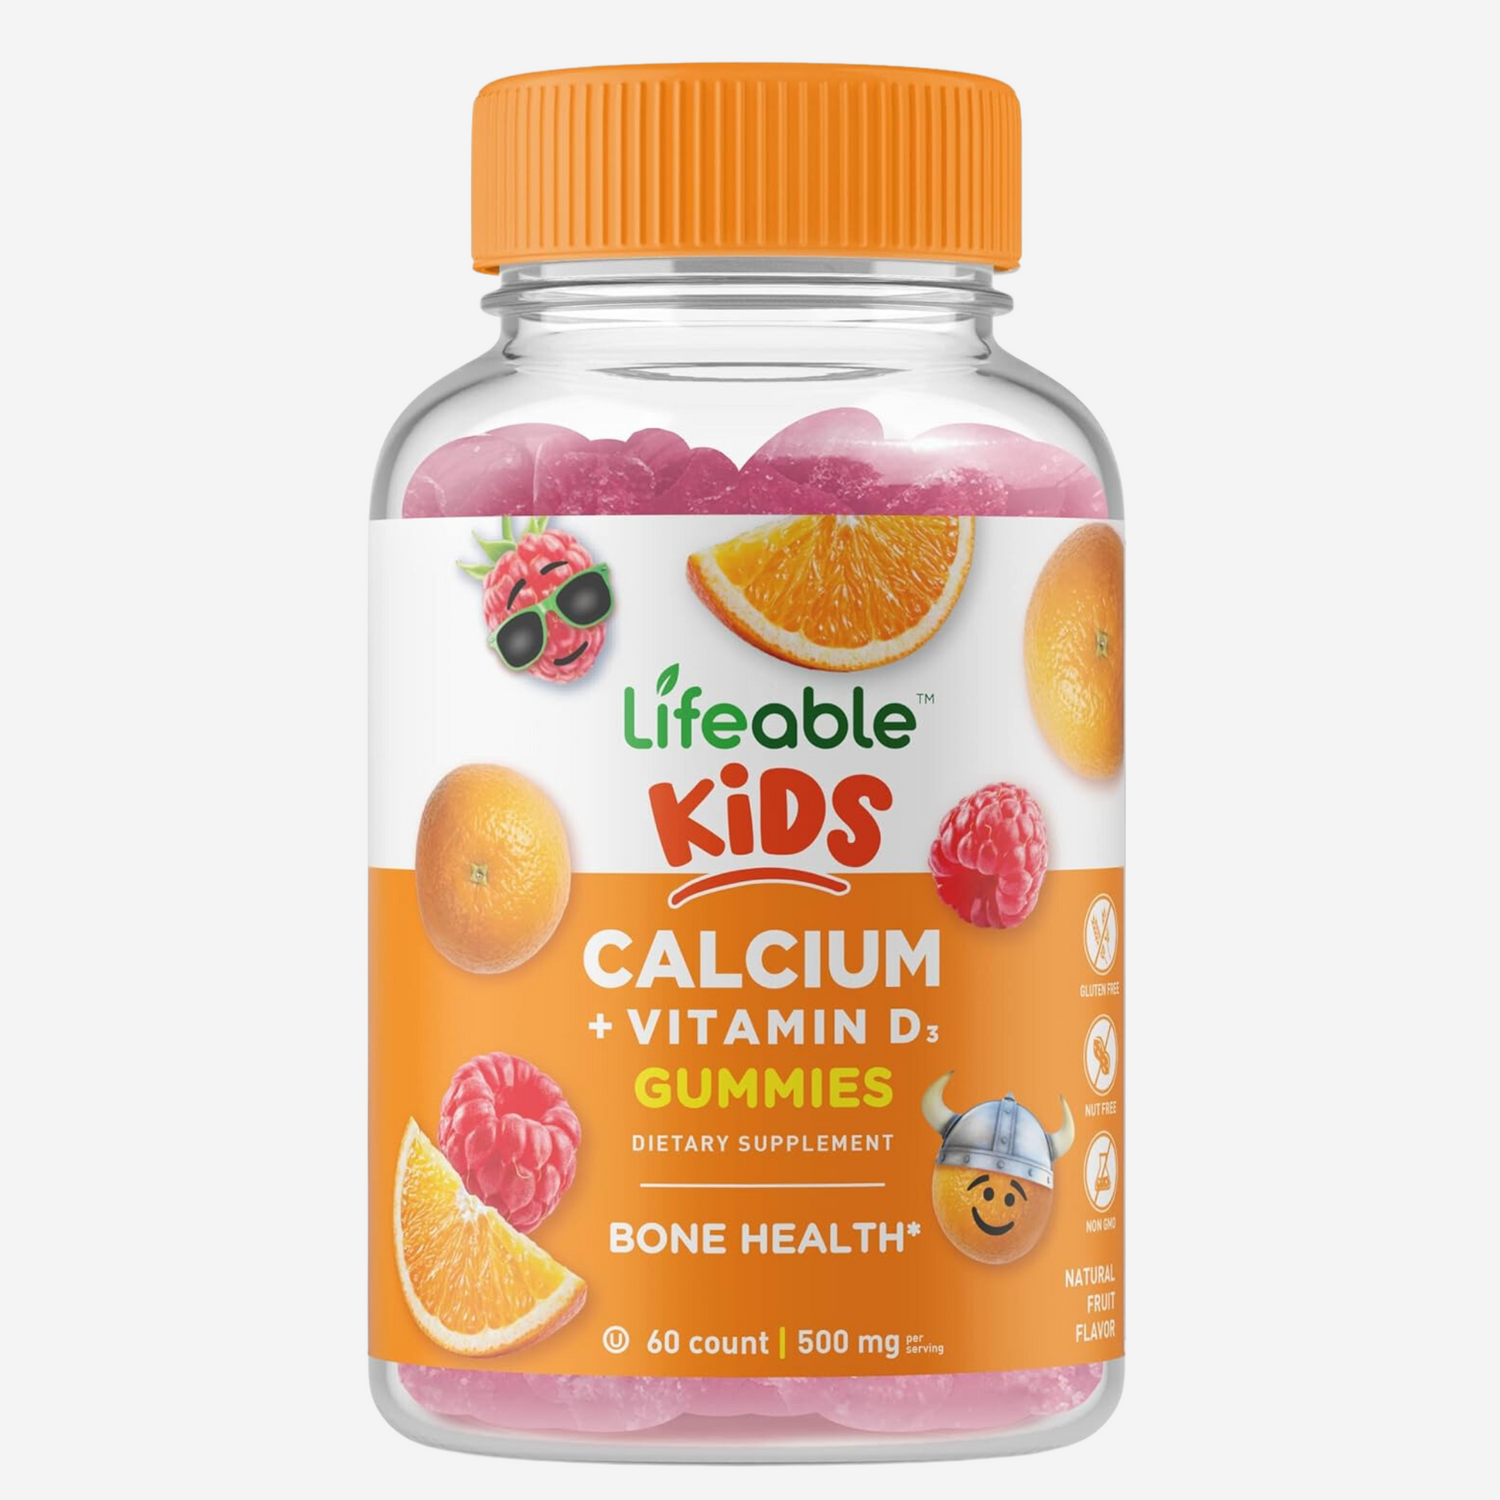 Lifeable Calcium 500 mg with Vitamin D3 1000 IU Gummies for Kids - Natural Flavor Vitamin Supplements 60 Gummies